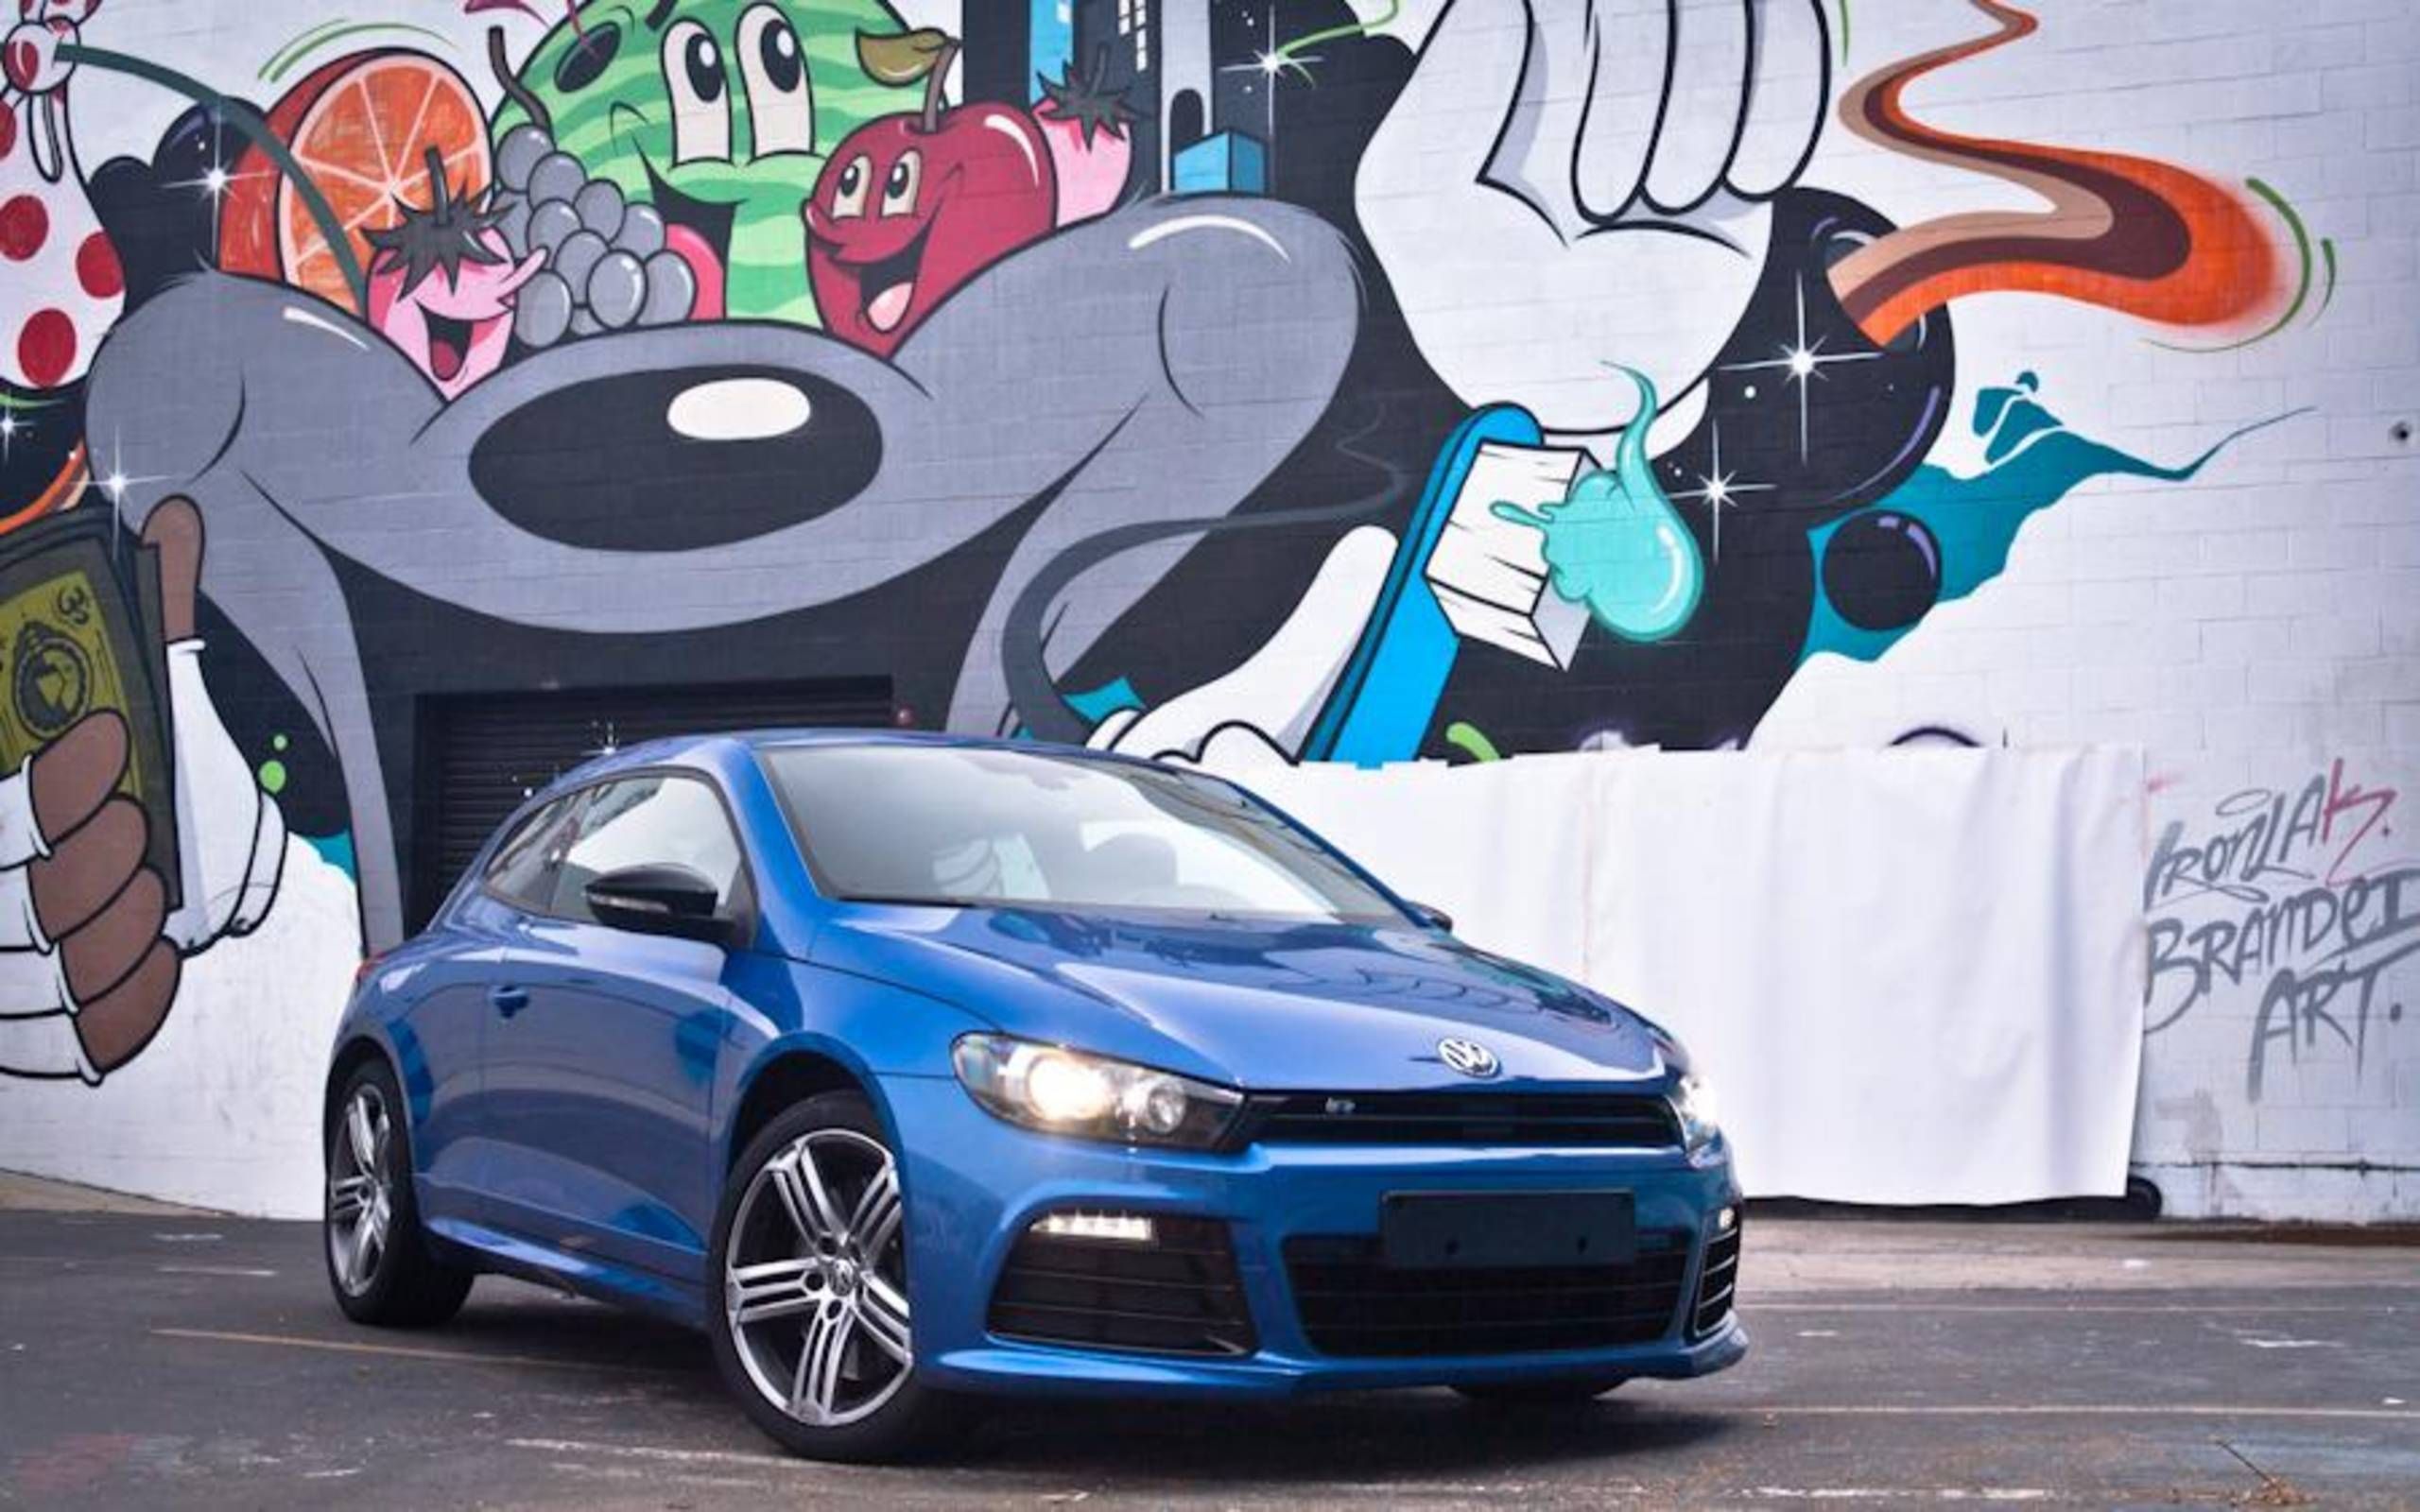 Driving the Volkswagen Scirocco R, one of America's rarest cars